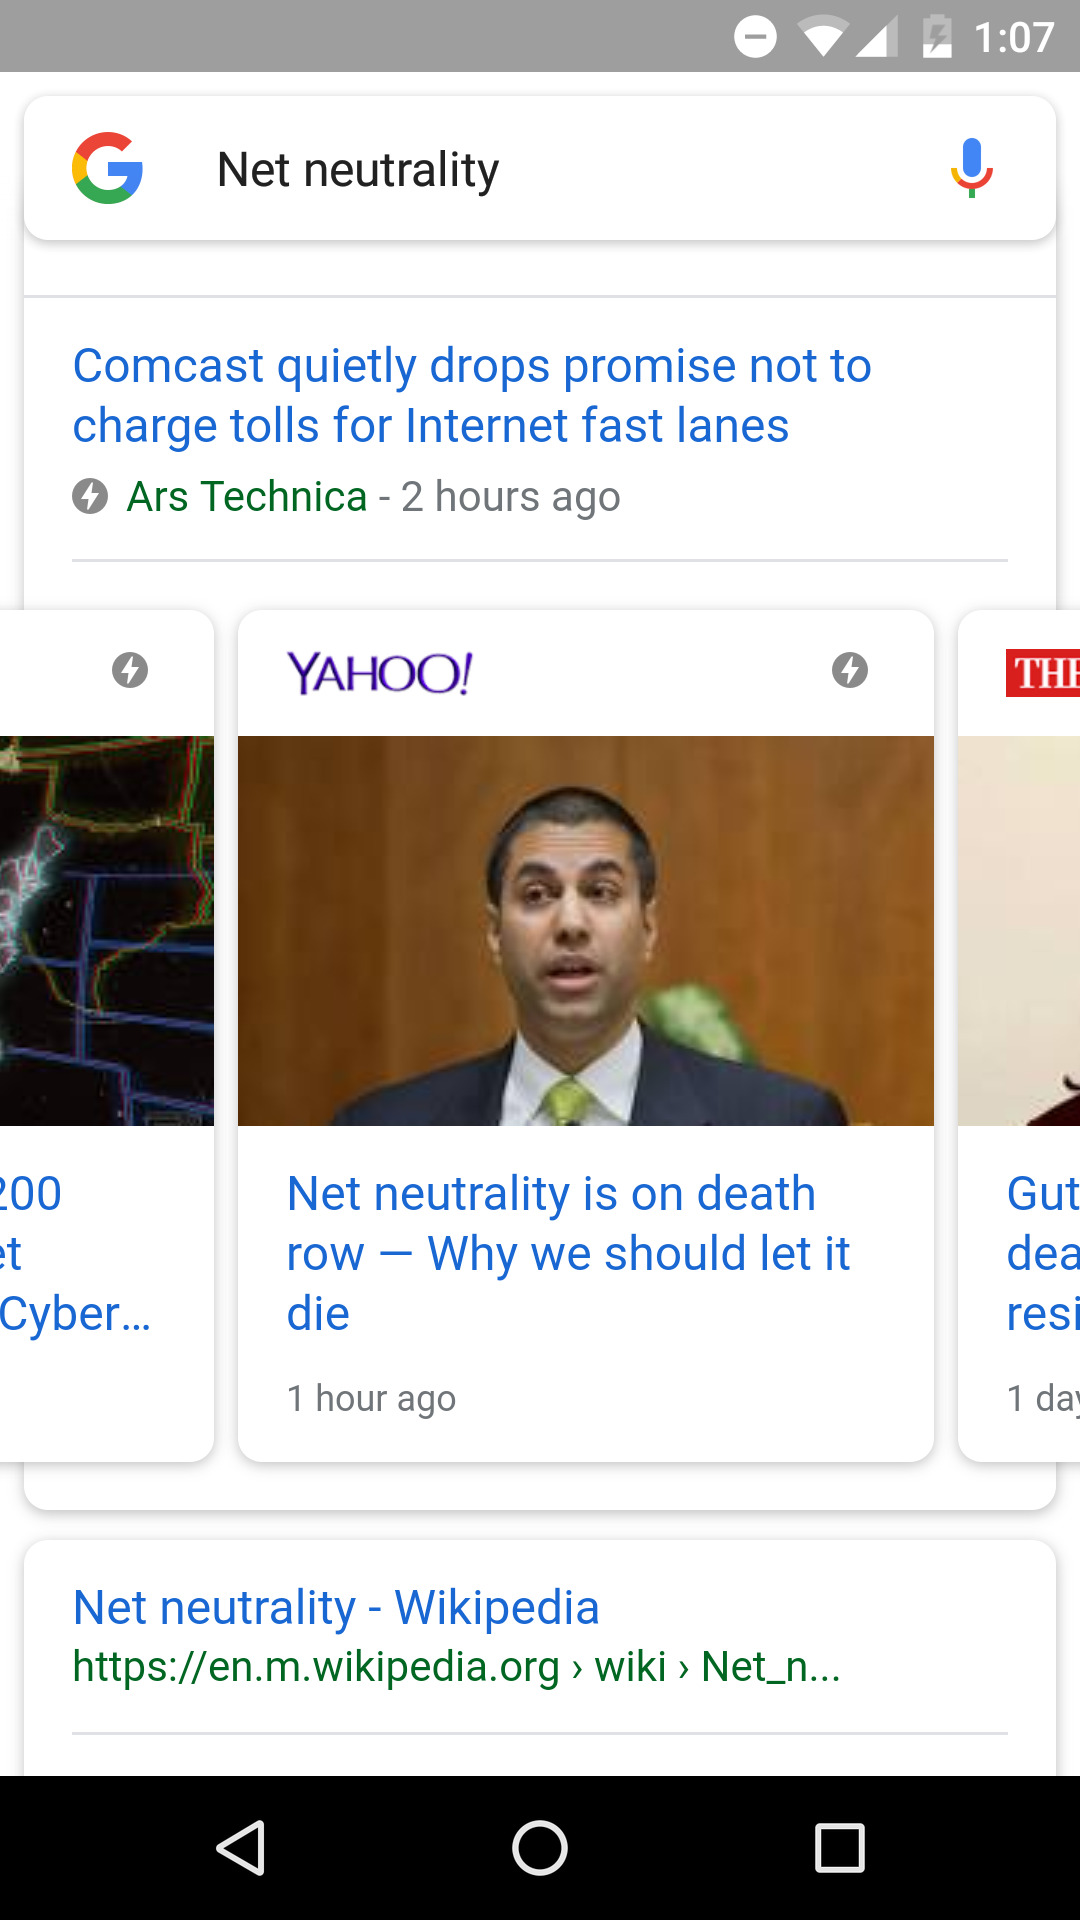 lolafsvoice: Friendly reminder that this hell site is owned by Yahoo, a company who